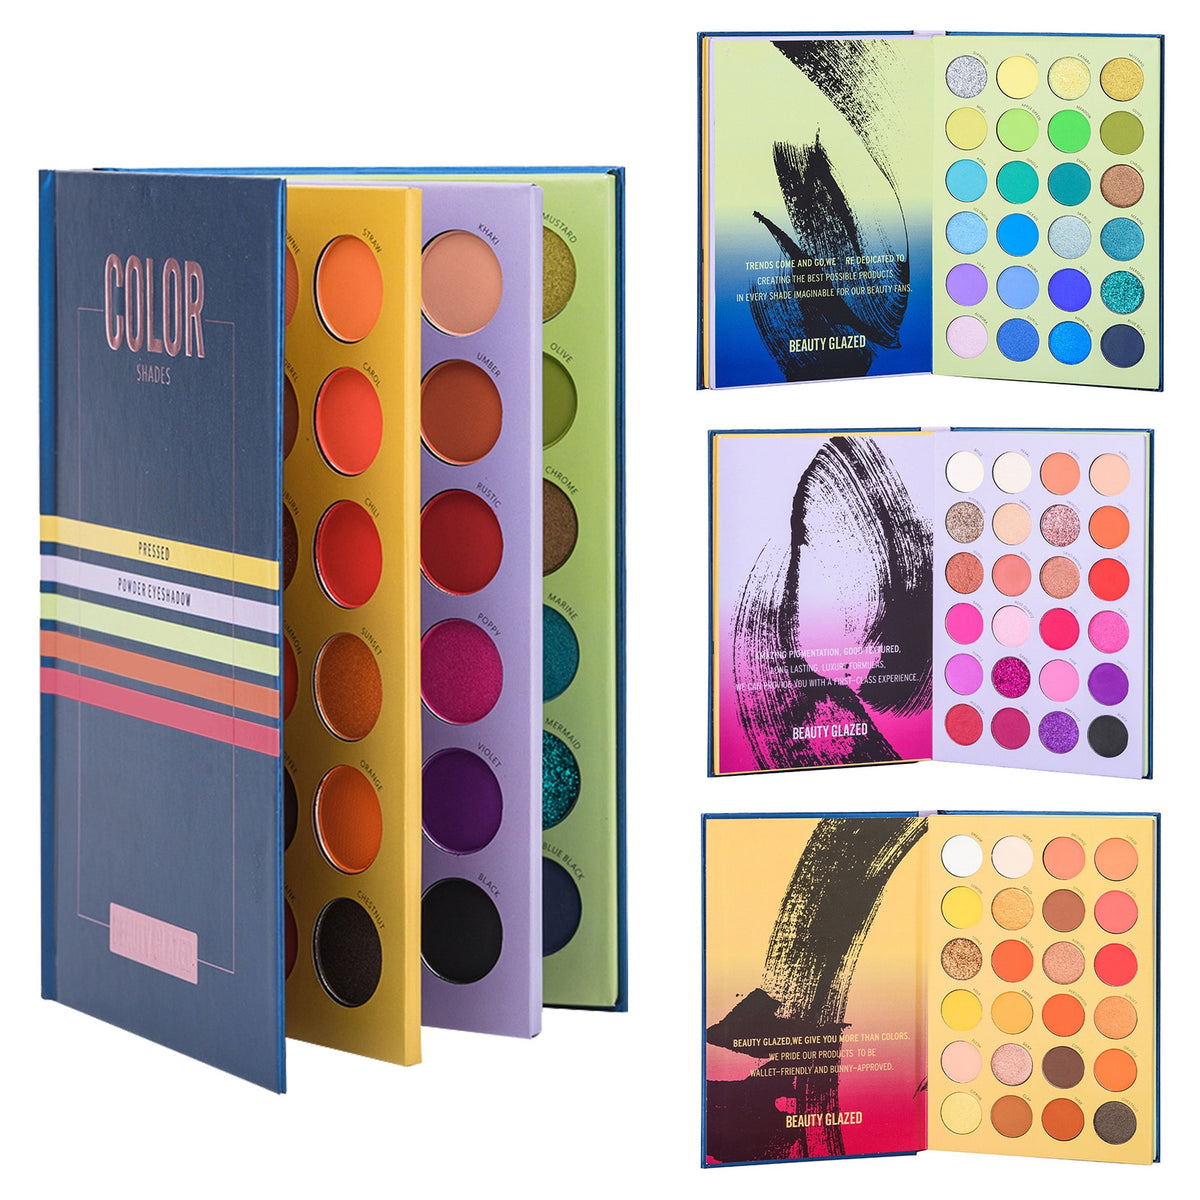 72 Colors Eyeshadow Palette Glazed Three-layer Book Style Make Up Cosmetic Highlight Matte Pearlescent Eye Shadow Makeup Palette